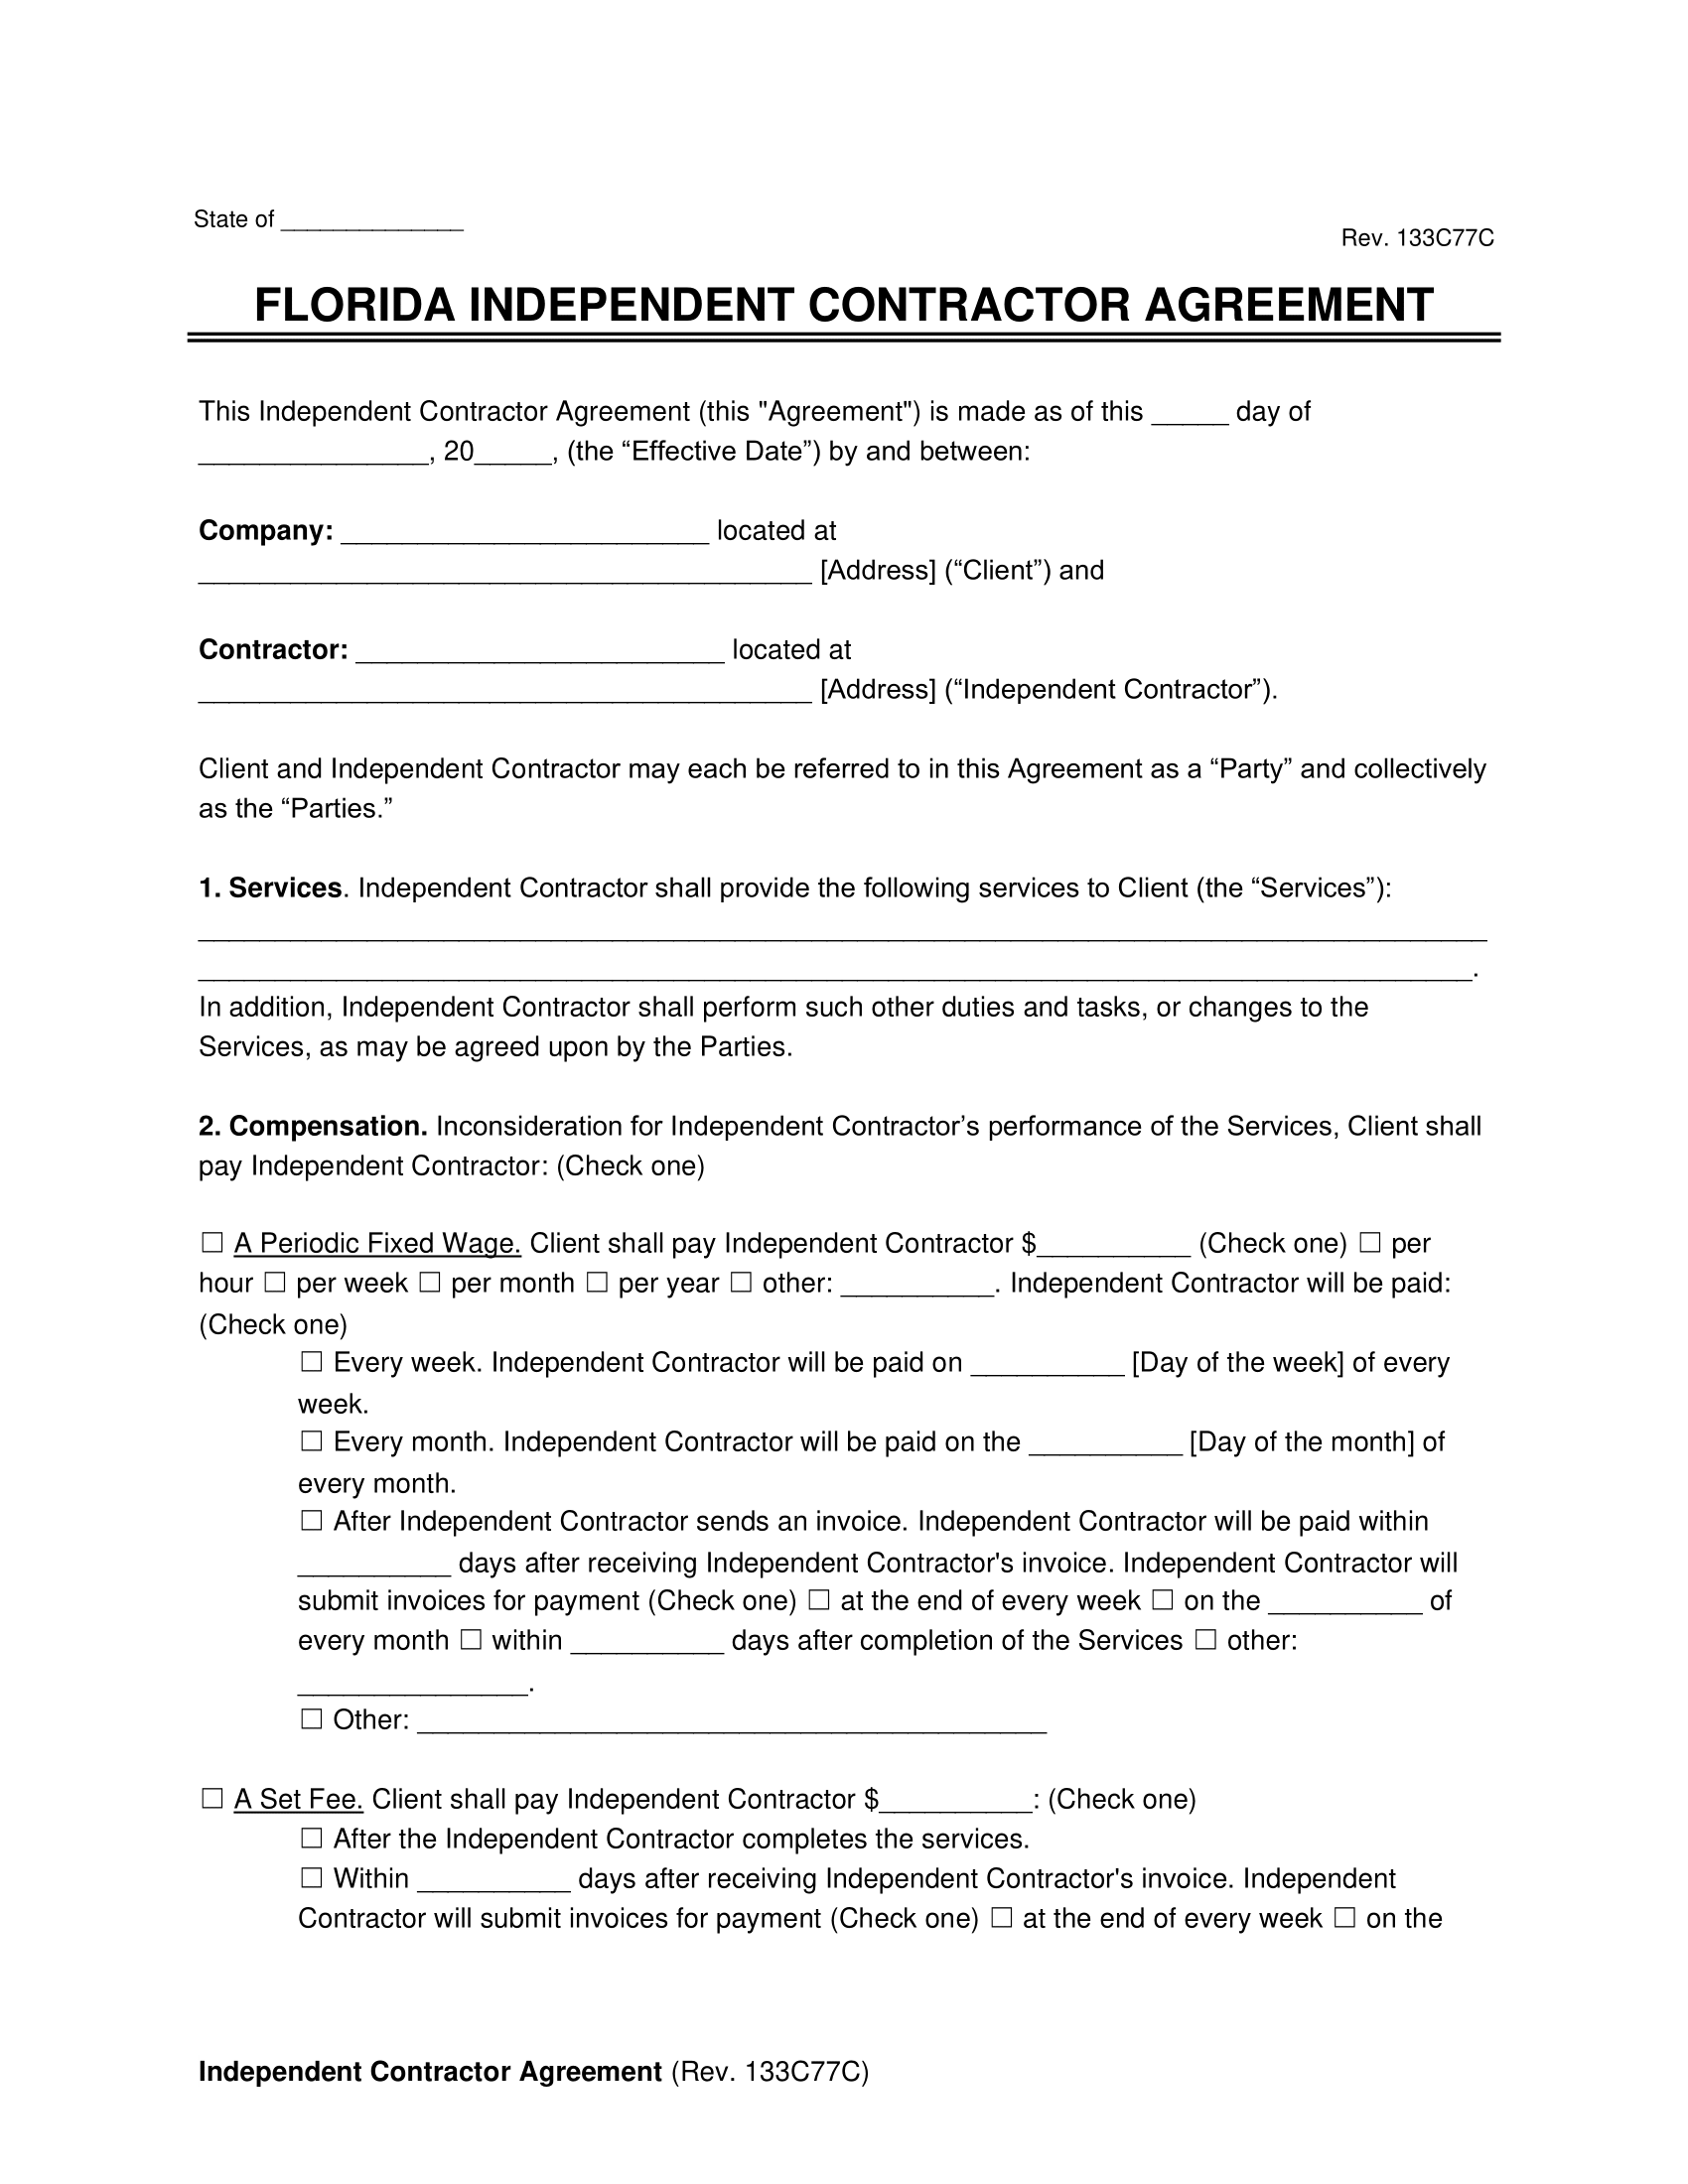 Florida Independent Contractor Agreement Template